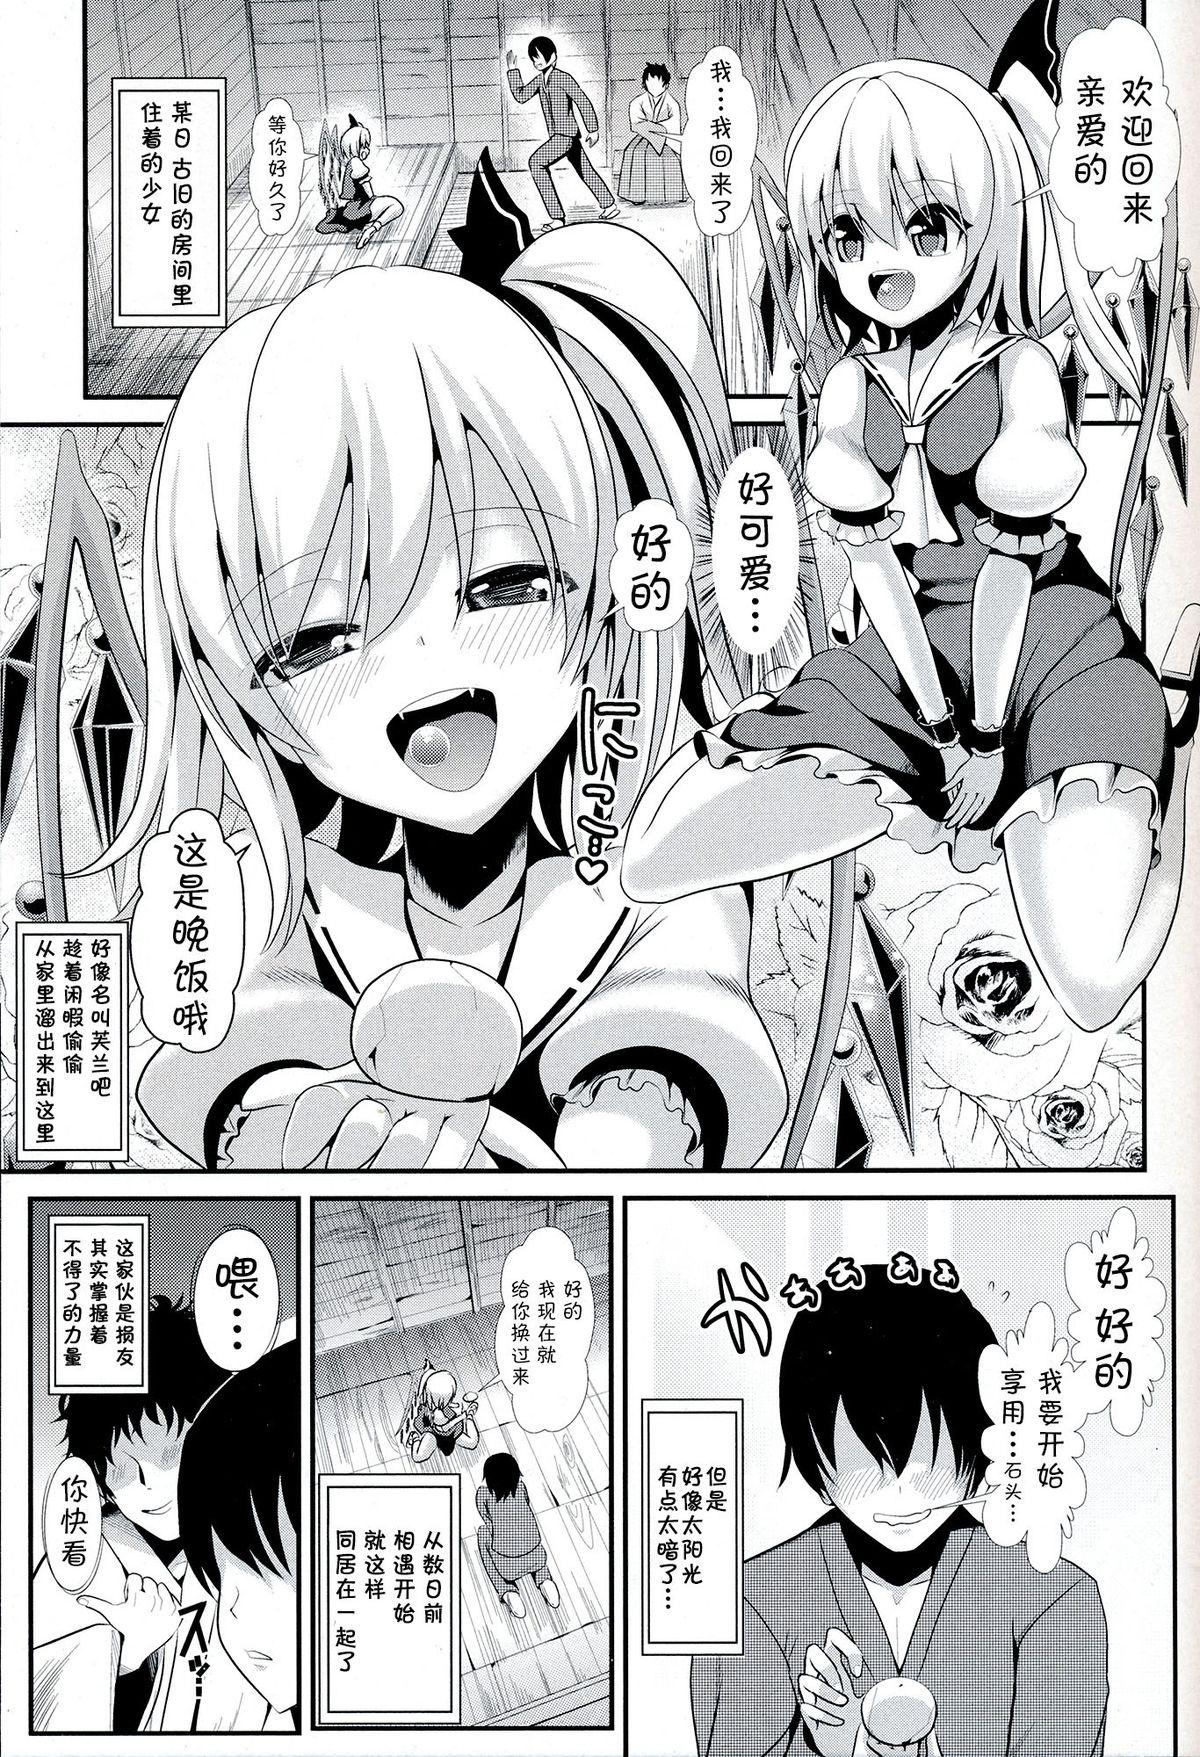 Grande Touhou Jikan 11 Flandre Scarlet - Touhou project Real Sex - Page 4